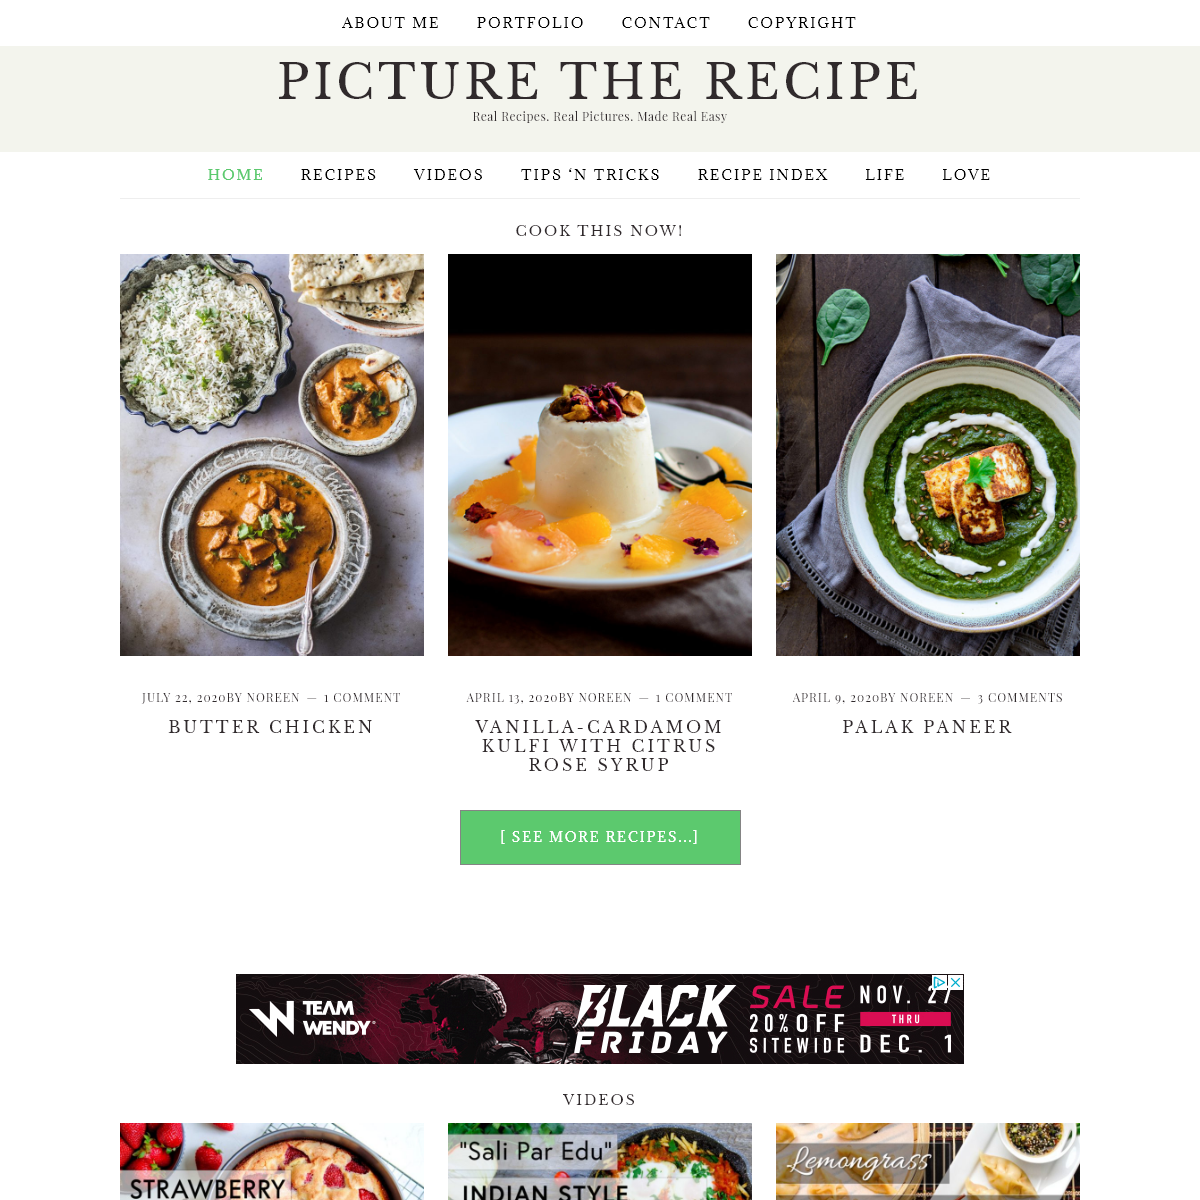 A complete backup of picturetherecipe.com